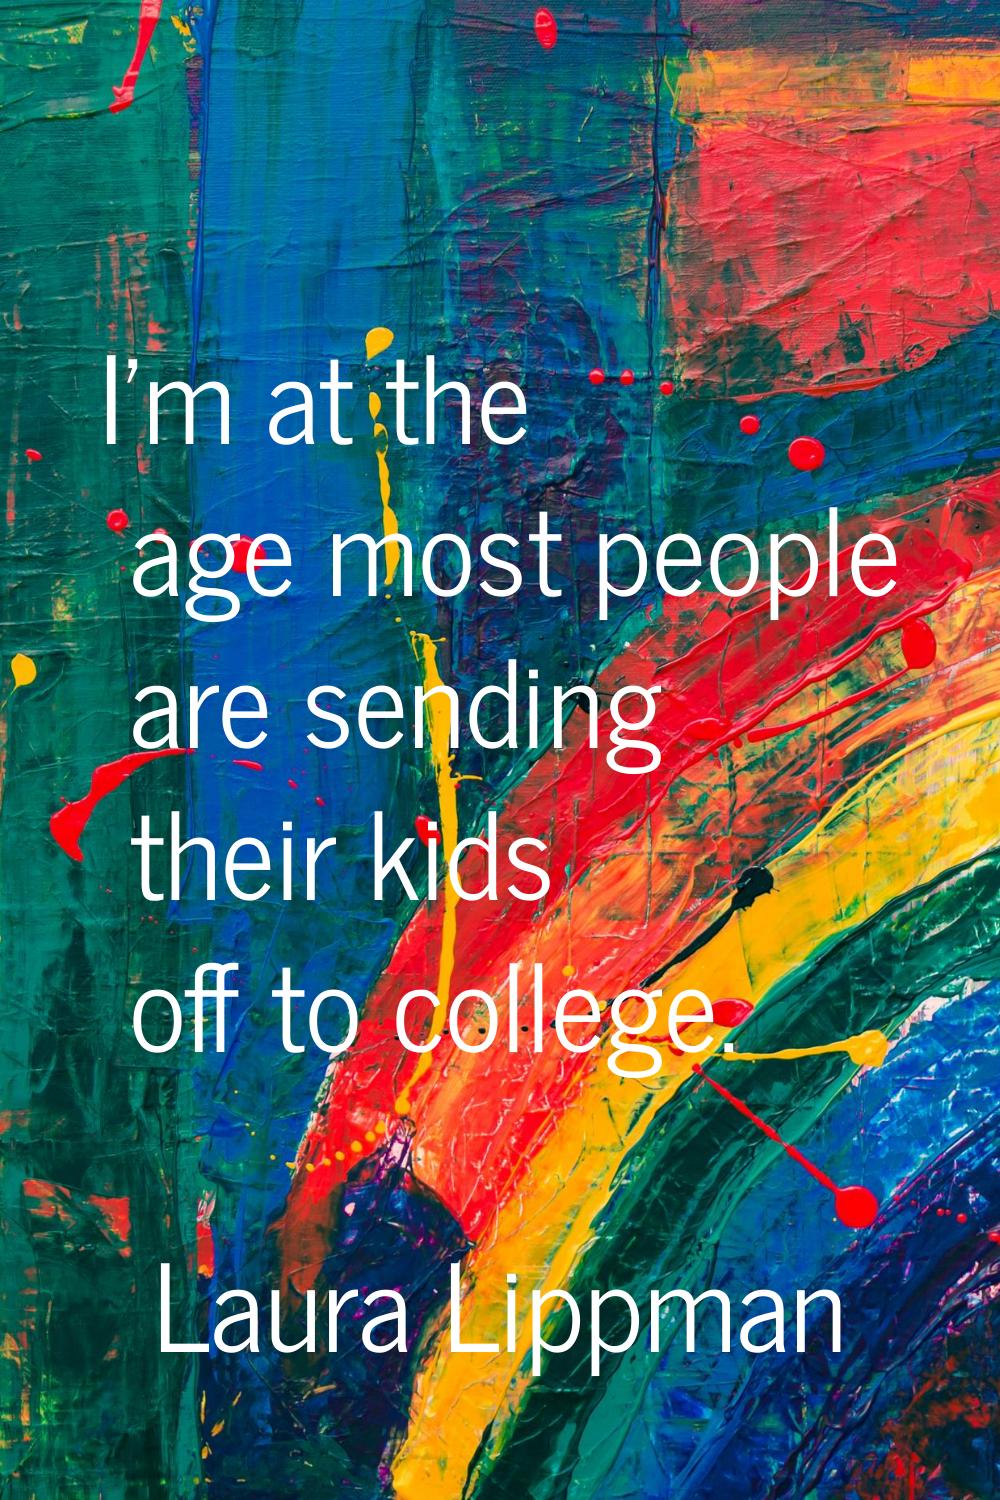 I'm at the age most people are sending their kids off to college.